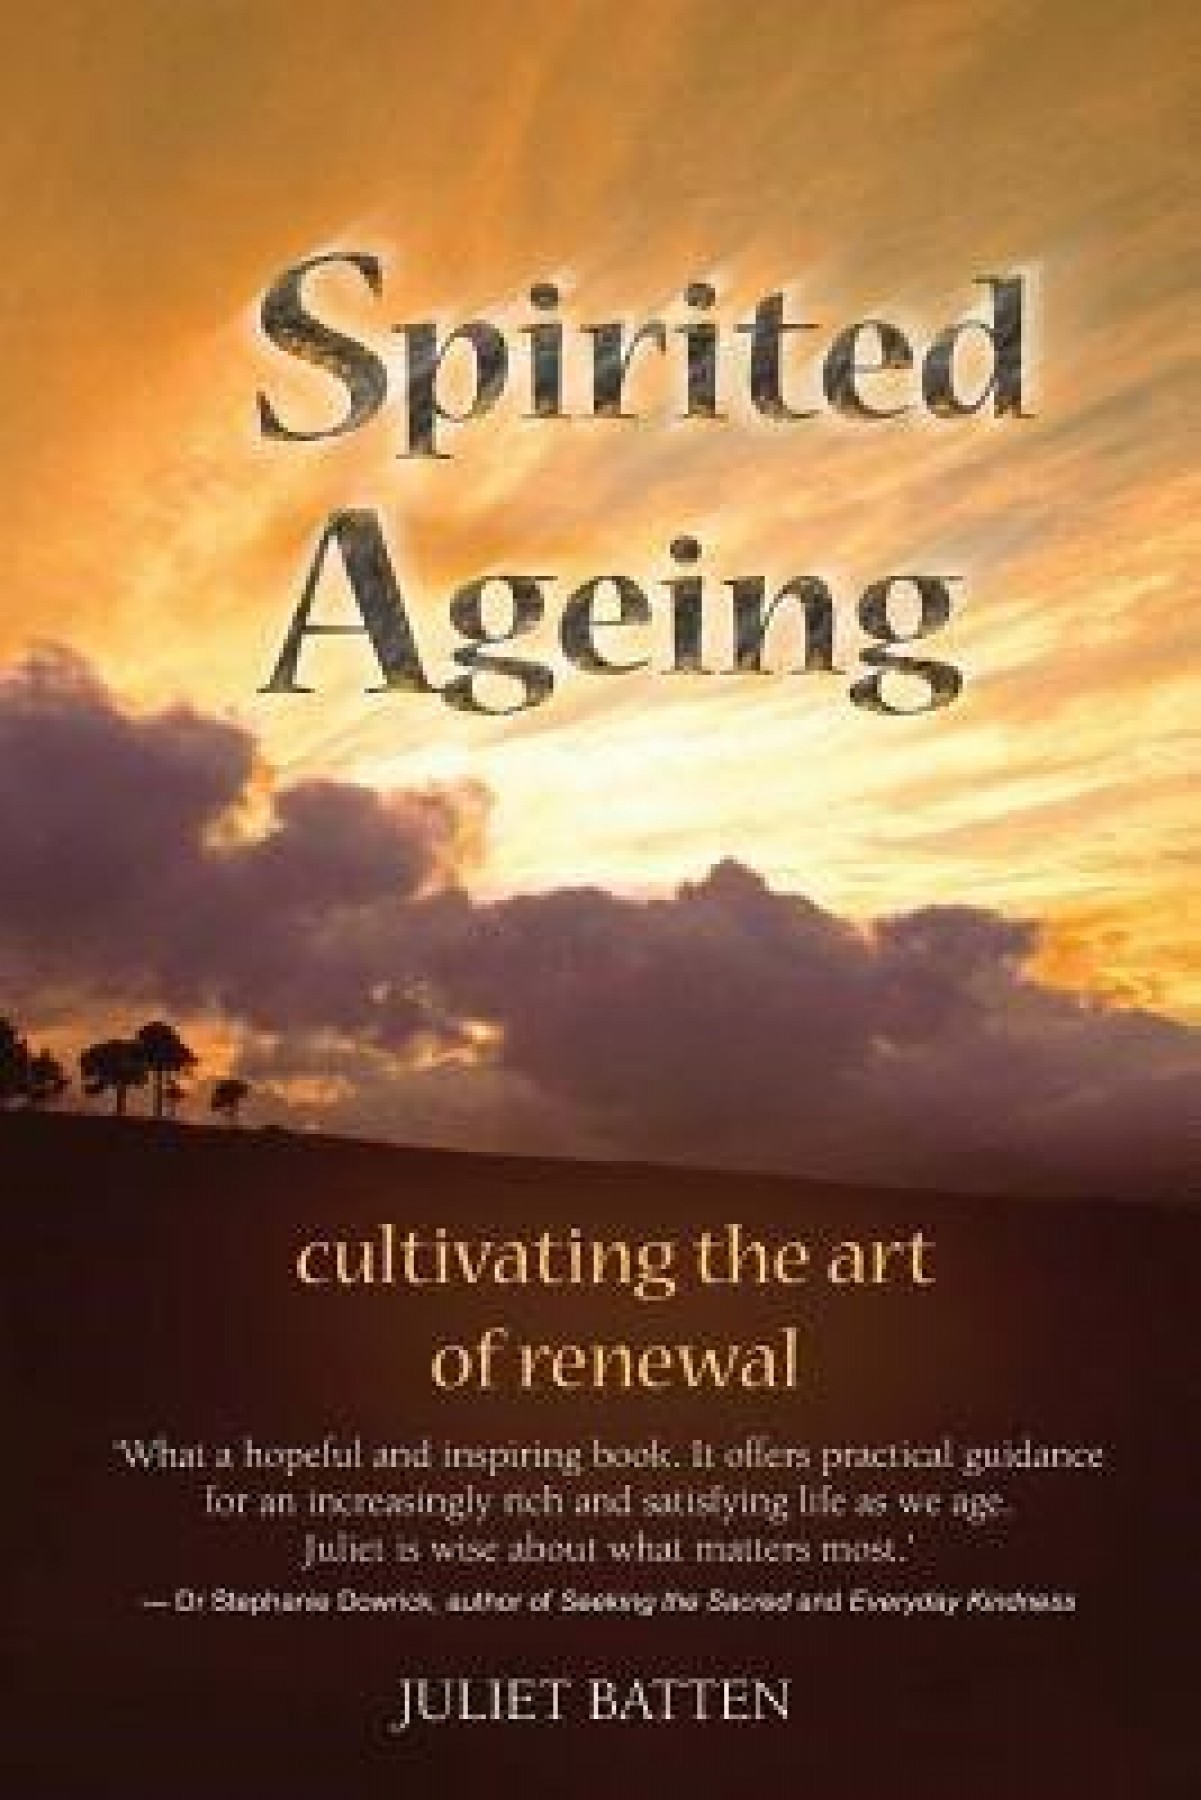 Spirited ageing: Cultivating the art of renewal